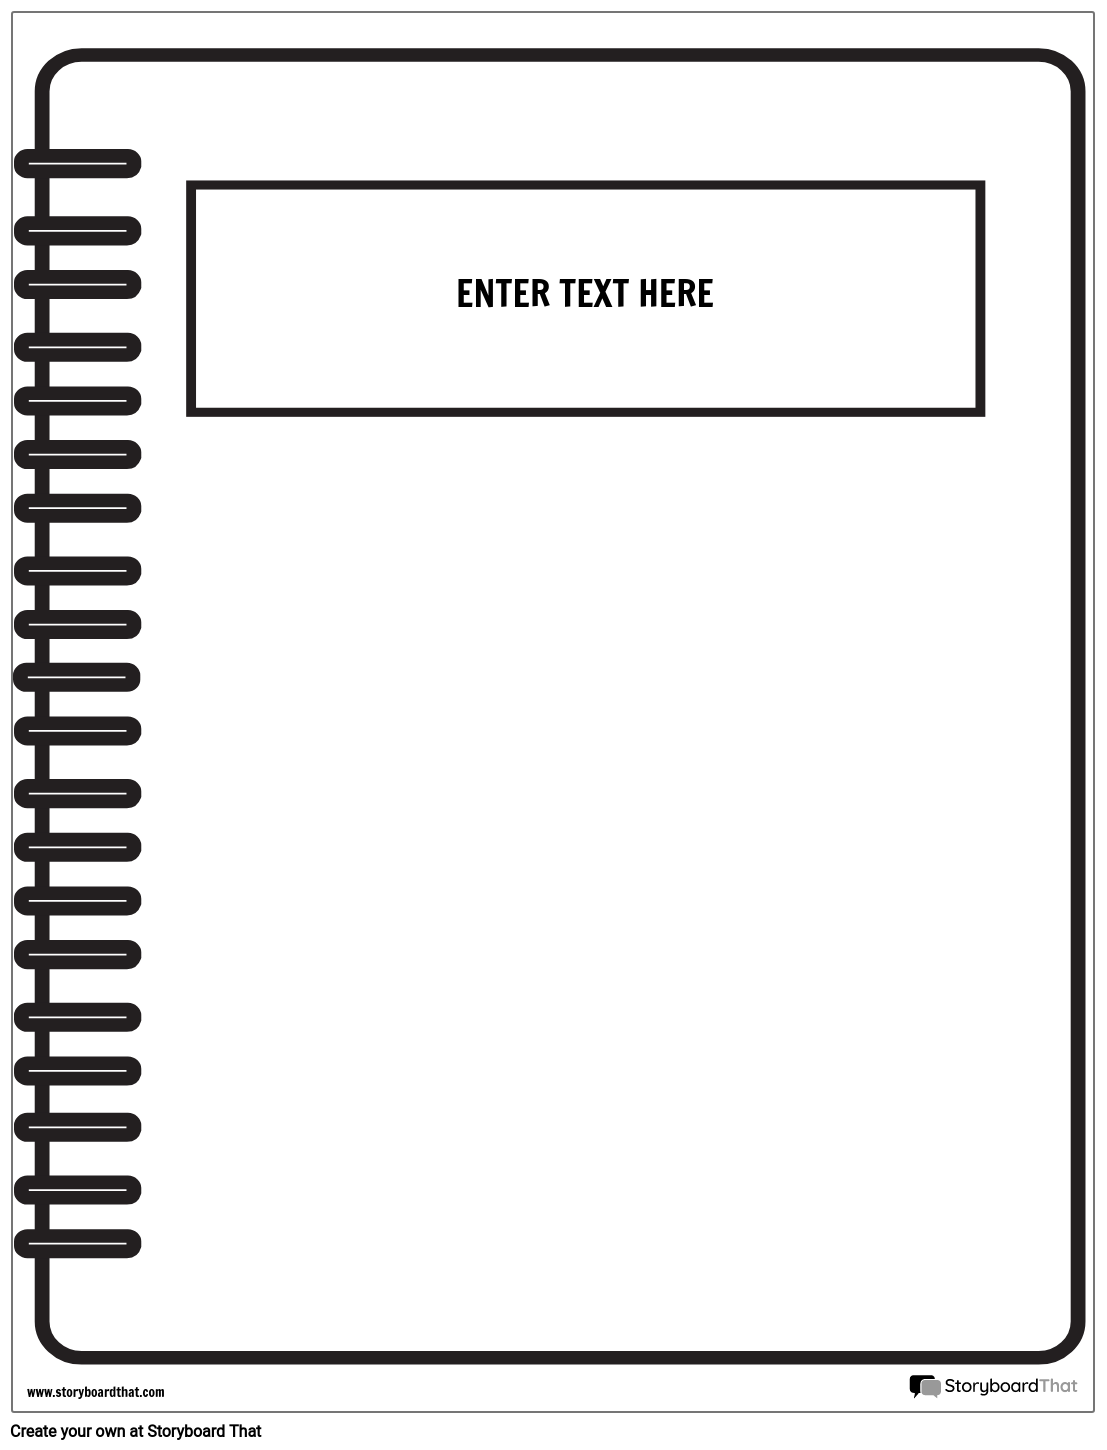 Journal Cover Template — DIY Journal Cover | StoryboardThat